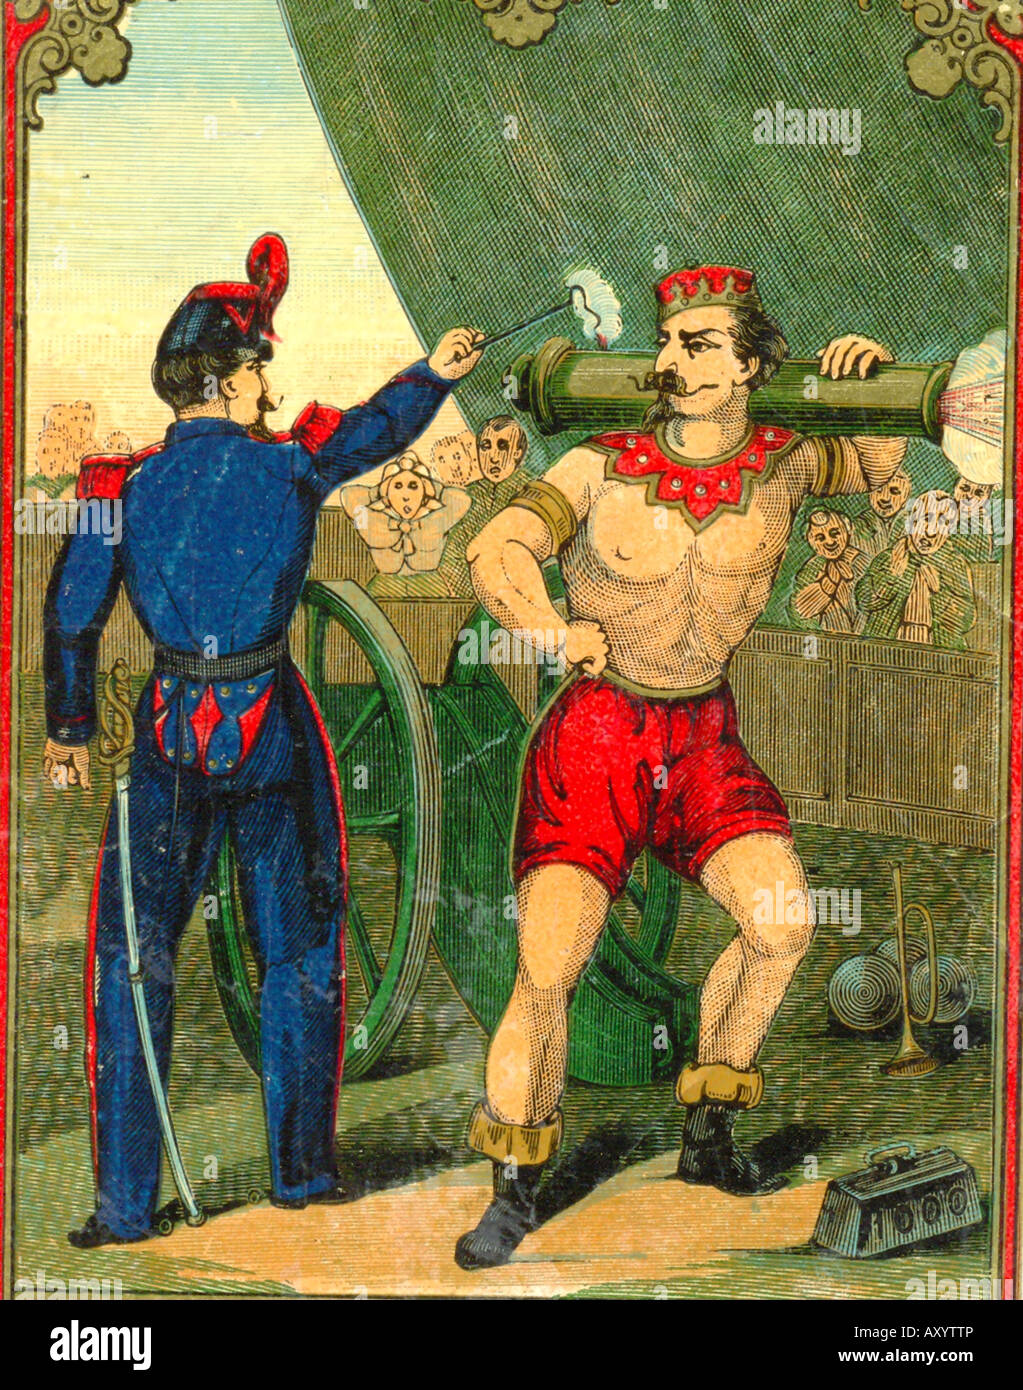 Circus scene showing weightlifter Stock Photo